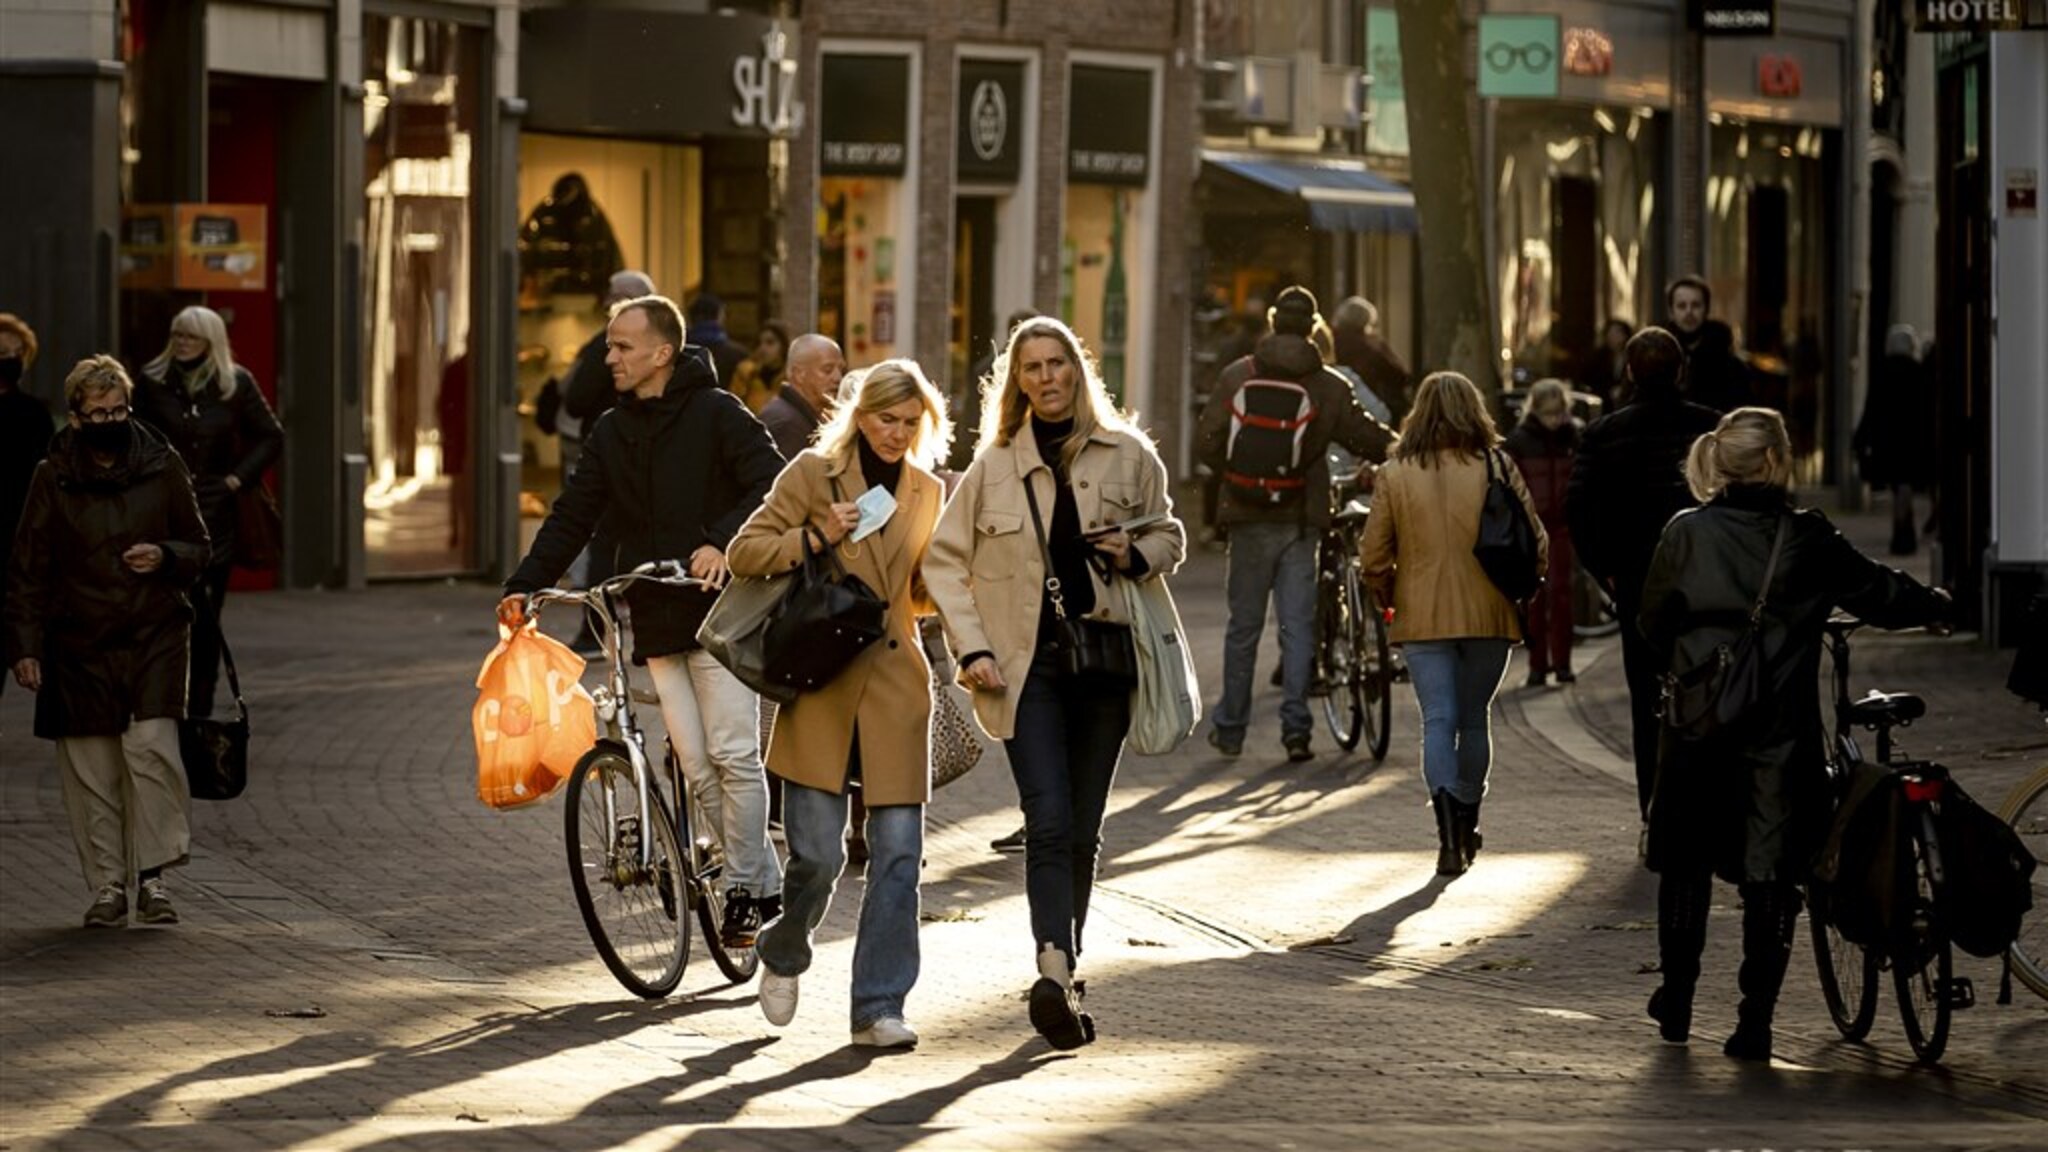 Only a quarter of the Dutch can consider themselves financially healthy